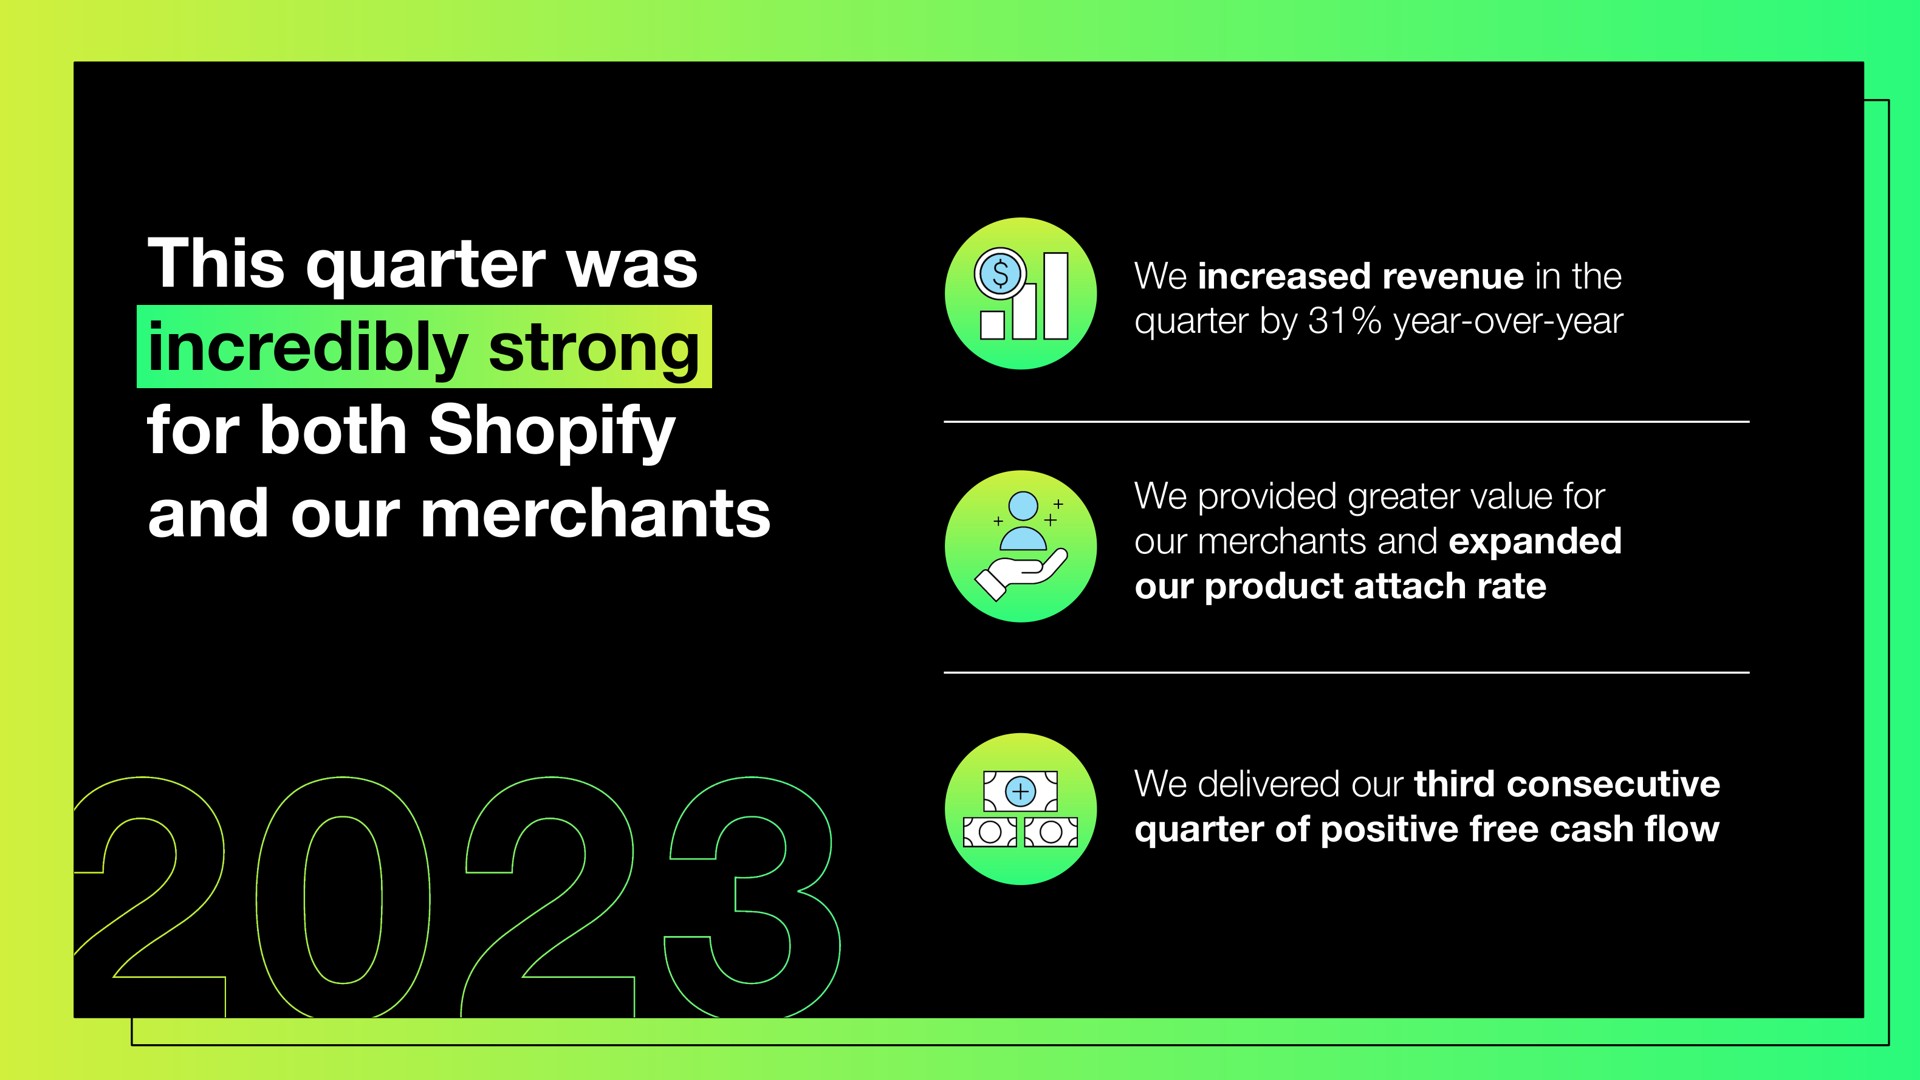 this quarter was incredibly strong for both and our merchants | Shopify